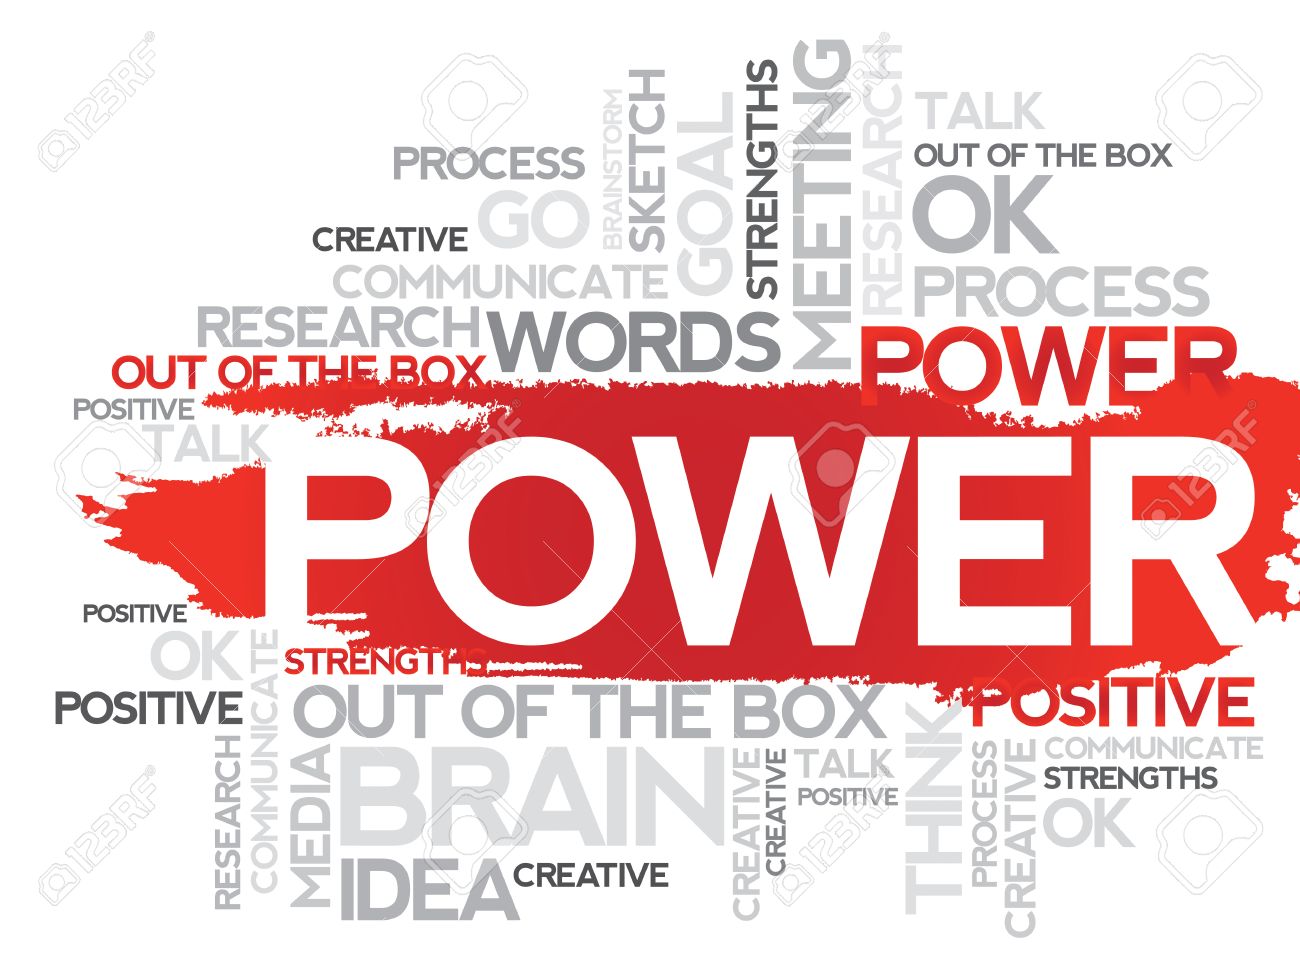 801+ Power Words That Pack A Punch & Convert Like Crazy